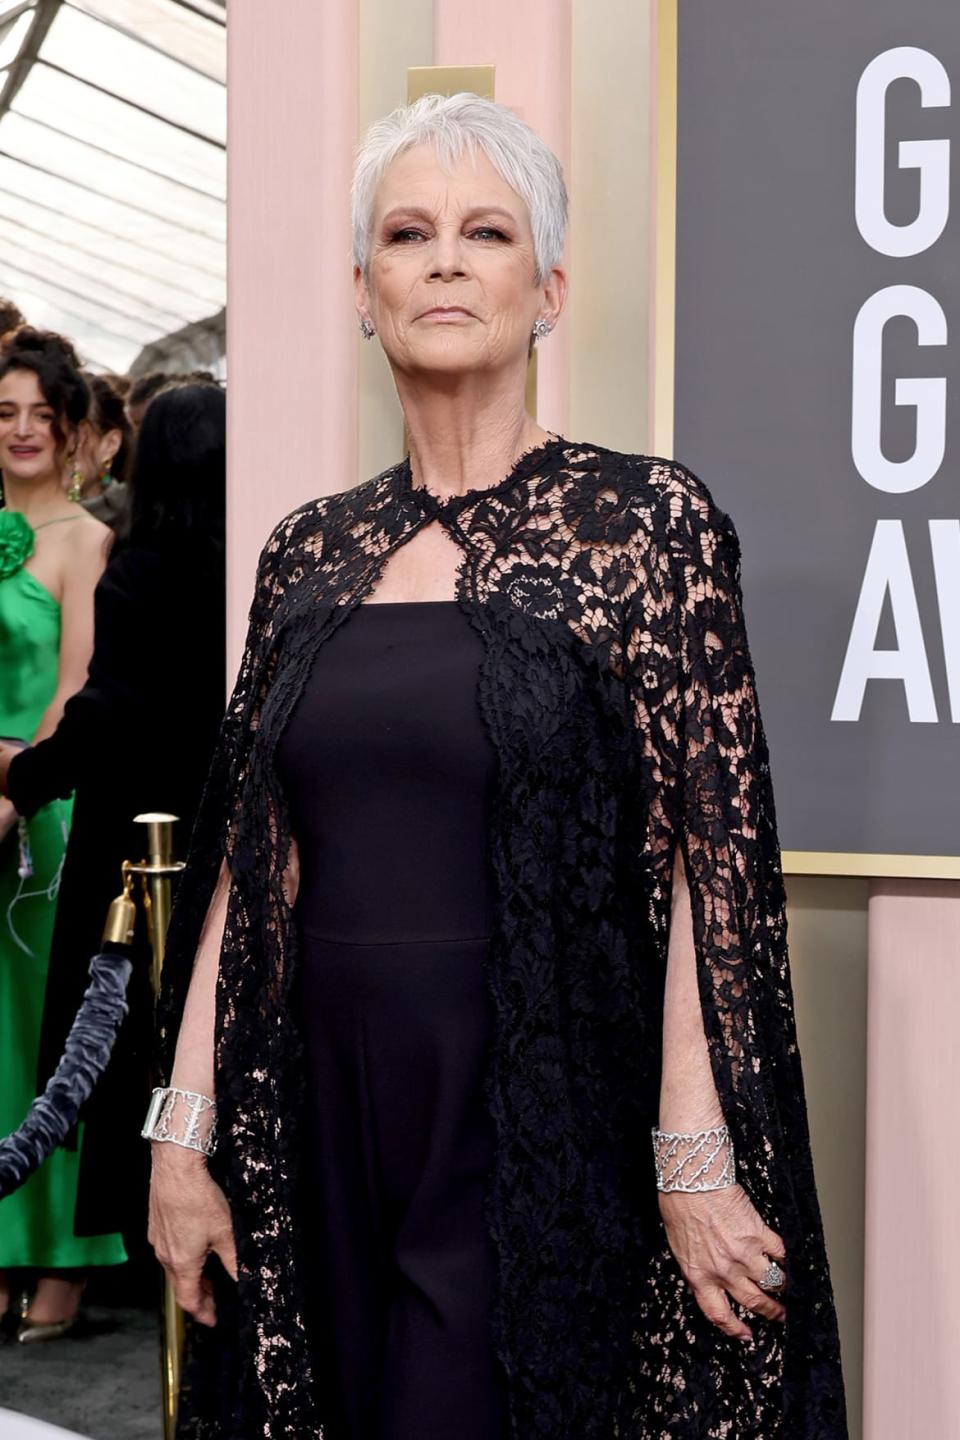 <div class="inline-image__caption"><p>Jamie Lee Curtis attends the 80th Annual Golden Globe Awards at The Beverly Hilton on January 10, 2023 in Beverly Hills, California.</p></div> <div class="inline-image__credit">Amy Sussman/Getty Images</div>